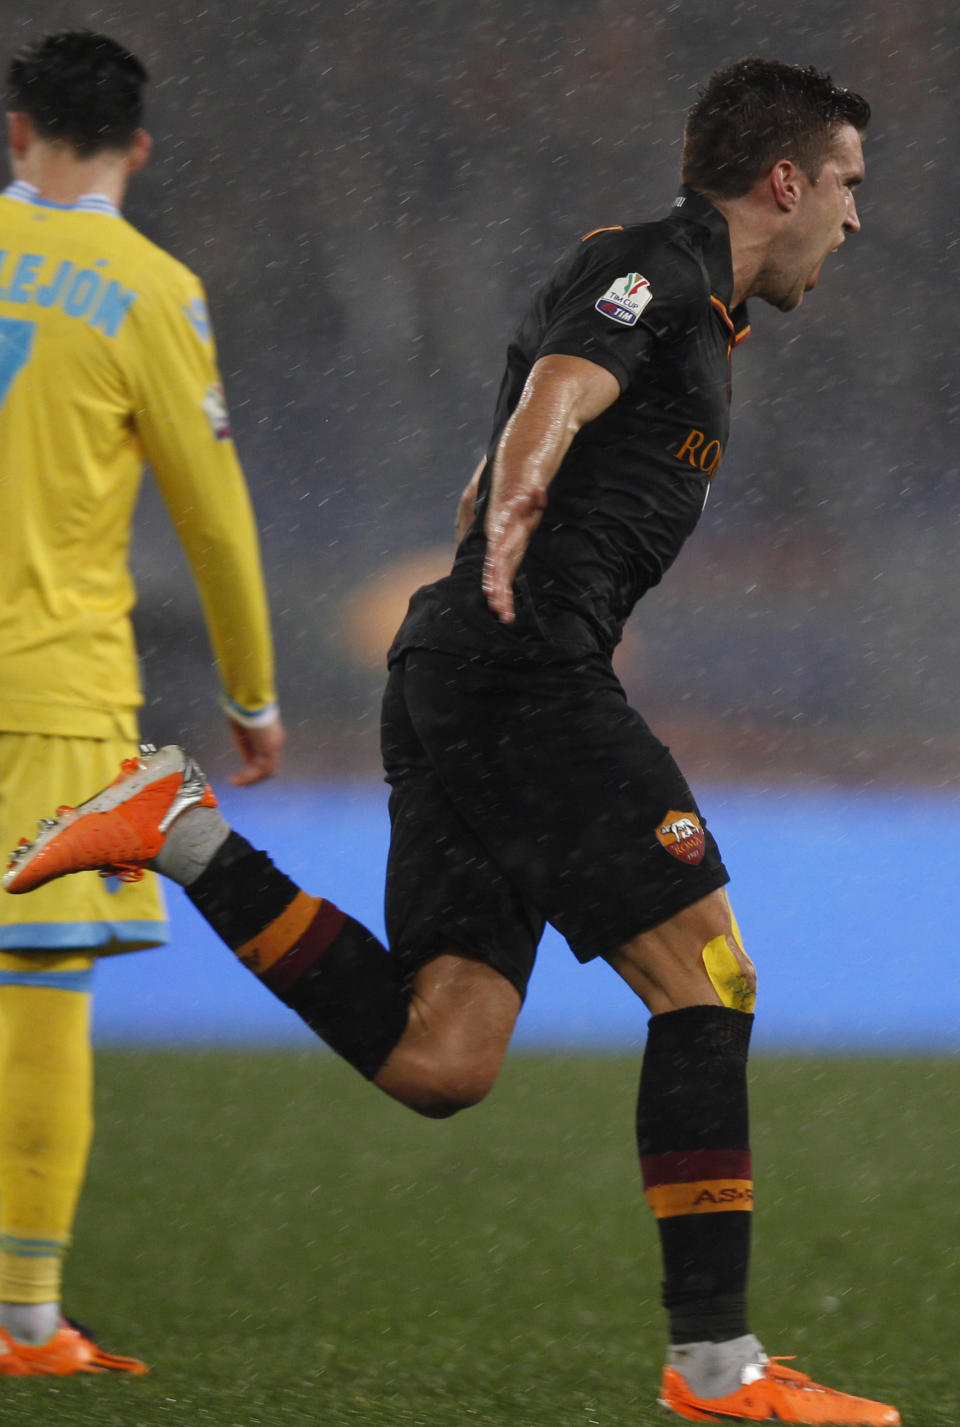 AS Roma midfielder Kevin Strootman celebrates after scoring during an Italian Cup, semifinal first leg match, between AS Roma and Napoli at Rome's Olympic stadium, Wednesday, Feb. 5, 2014. (AP Photo/Alessandra Tarantino)